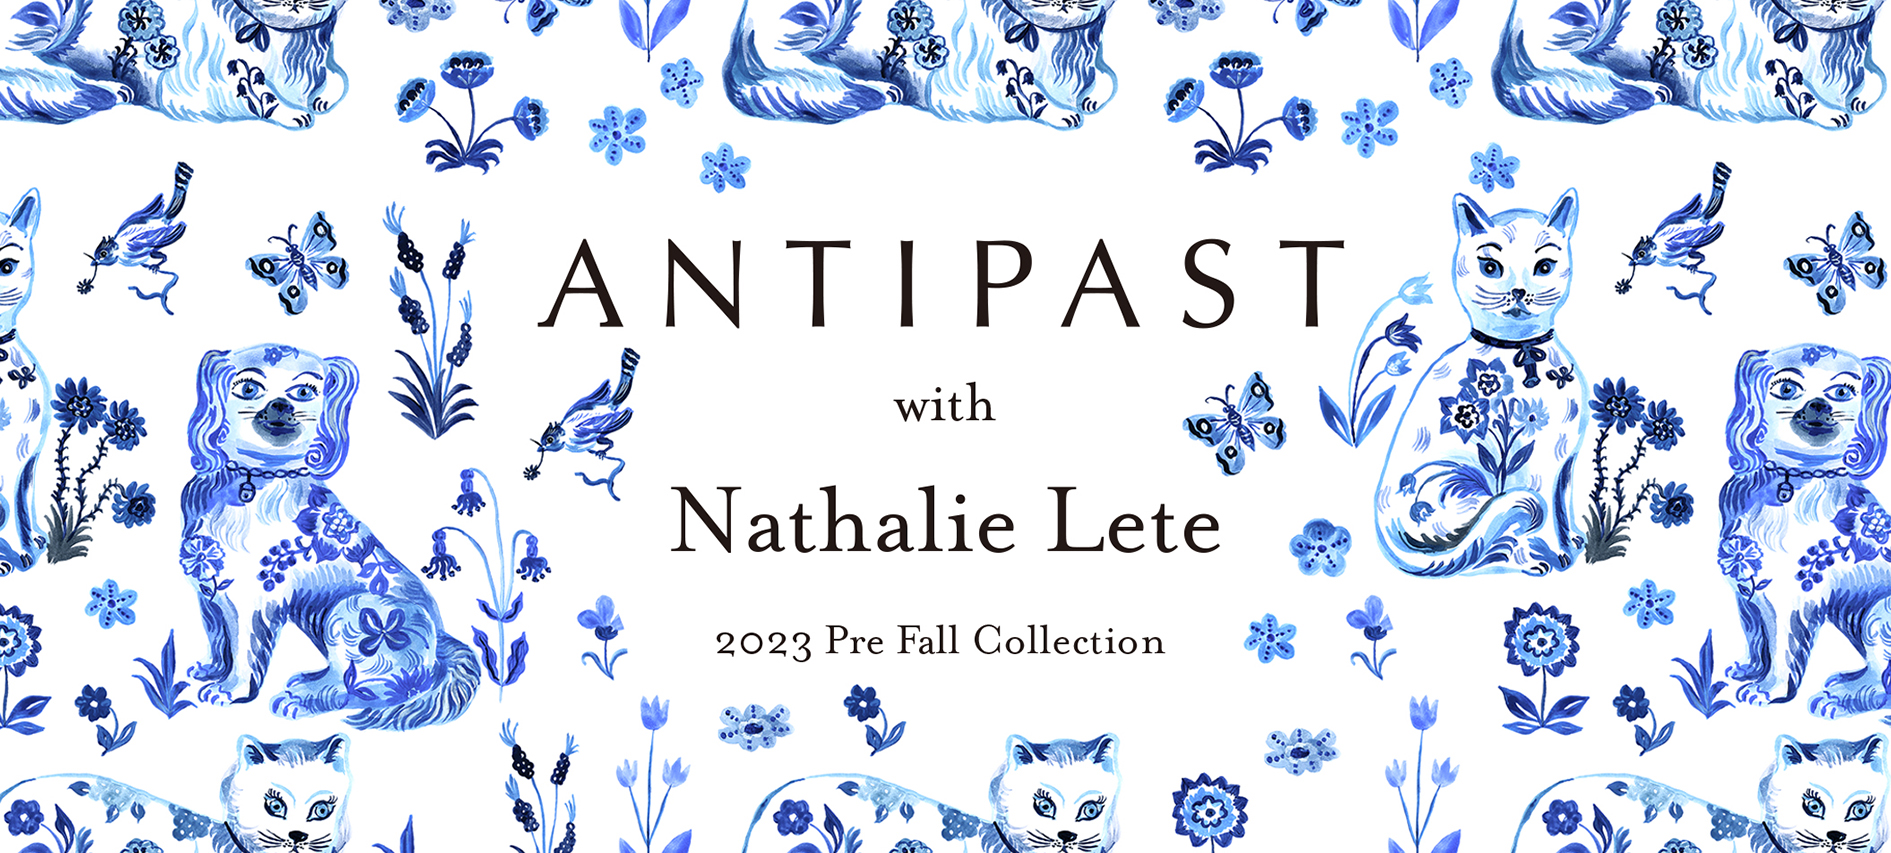 Nathalie Lete with ANTIPAST  2023 Pre Fall Collection  